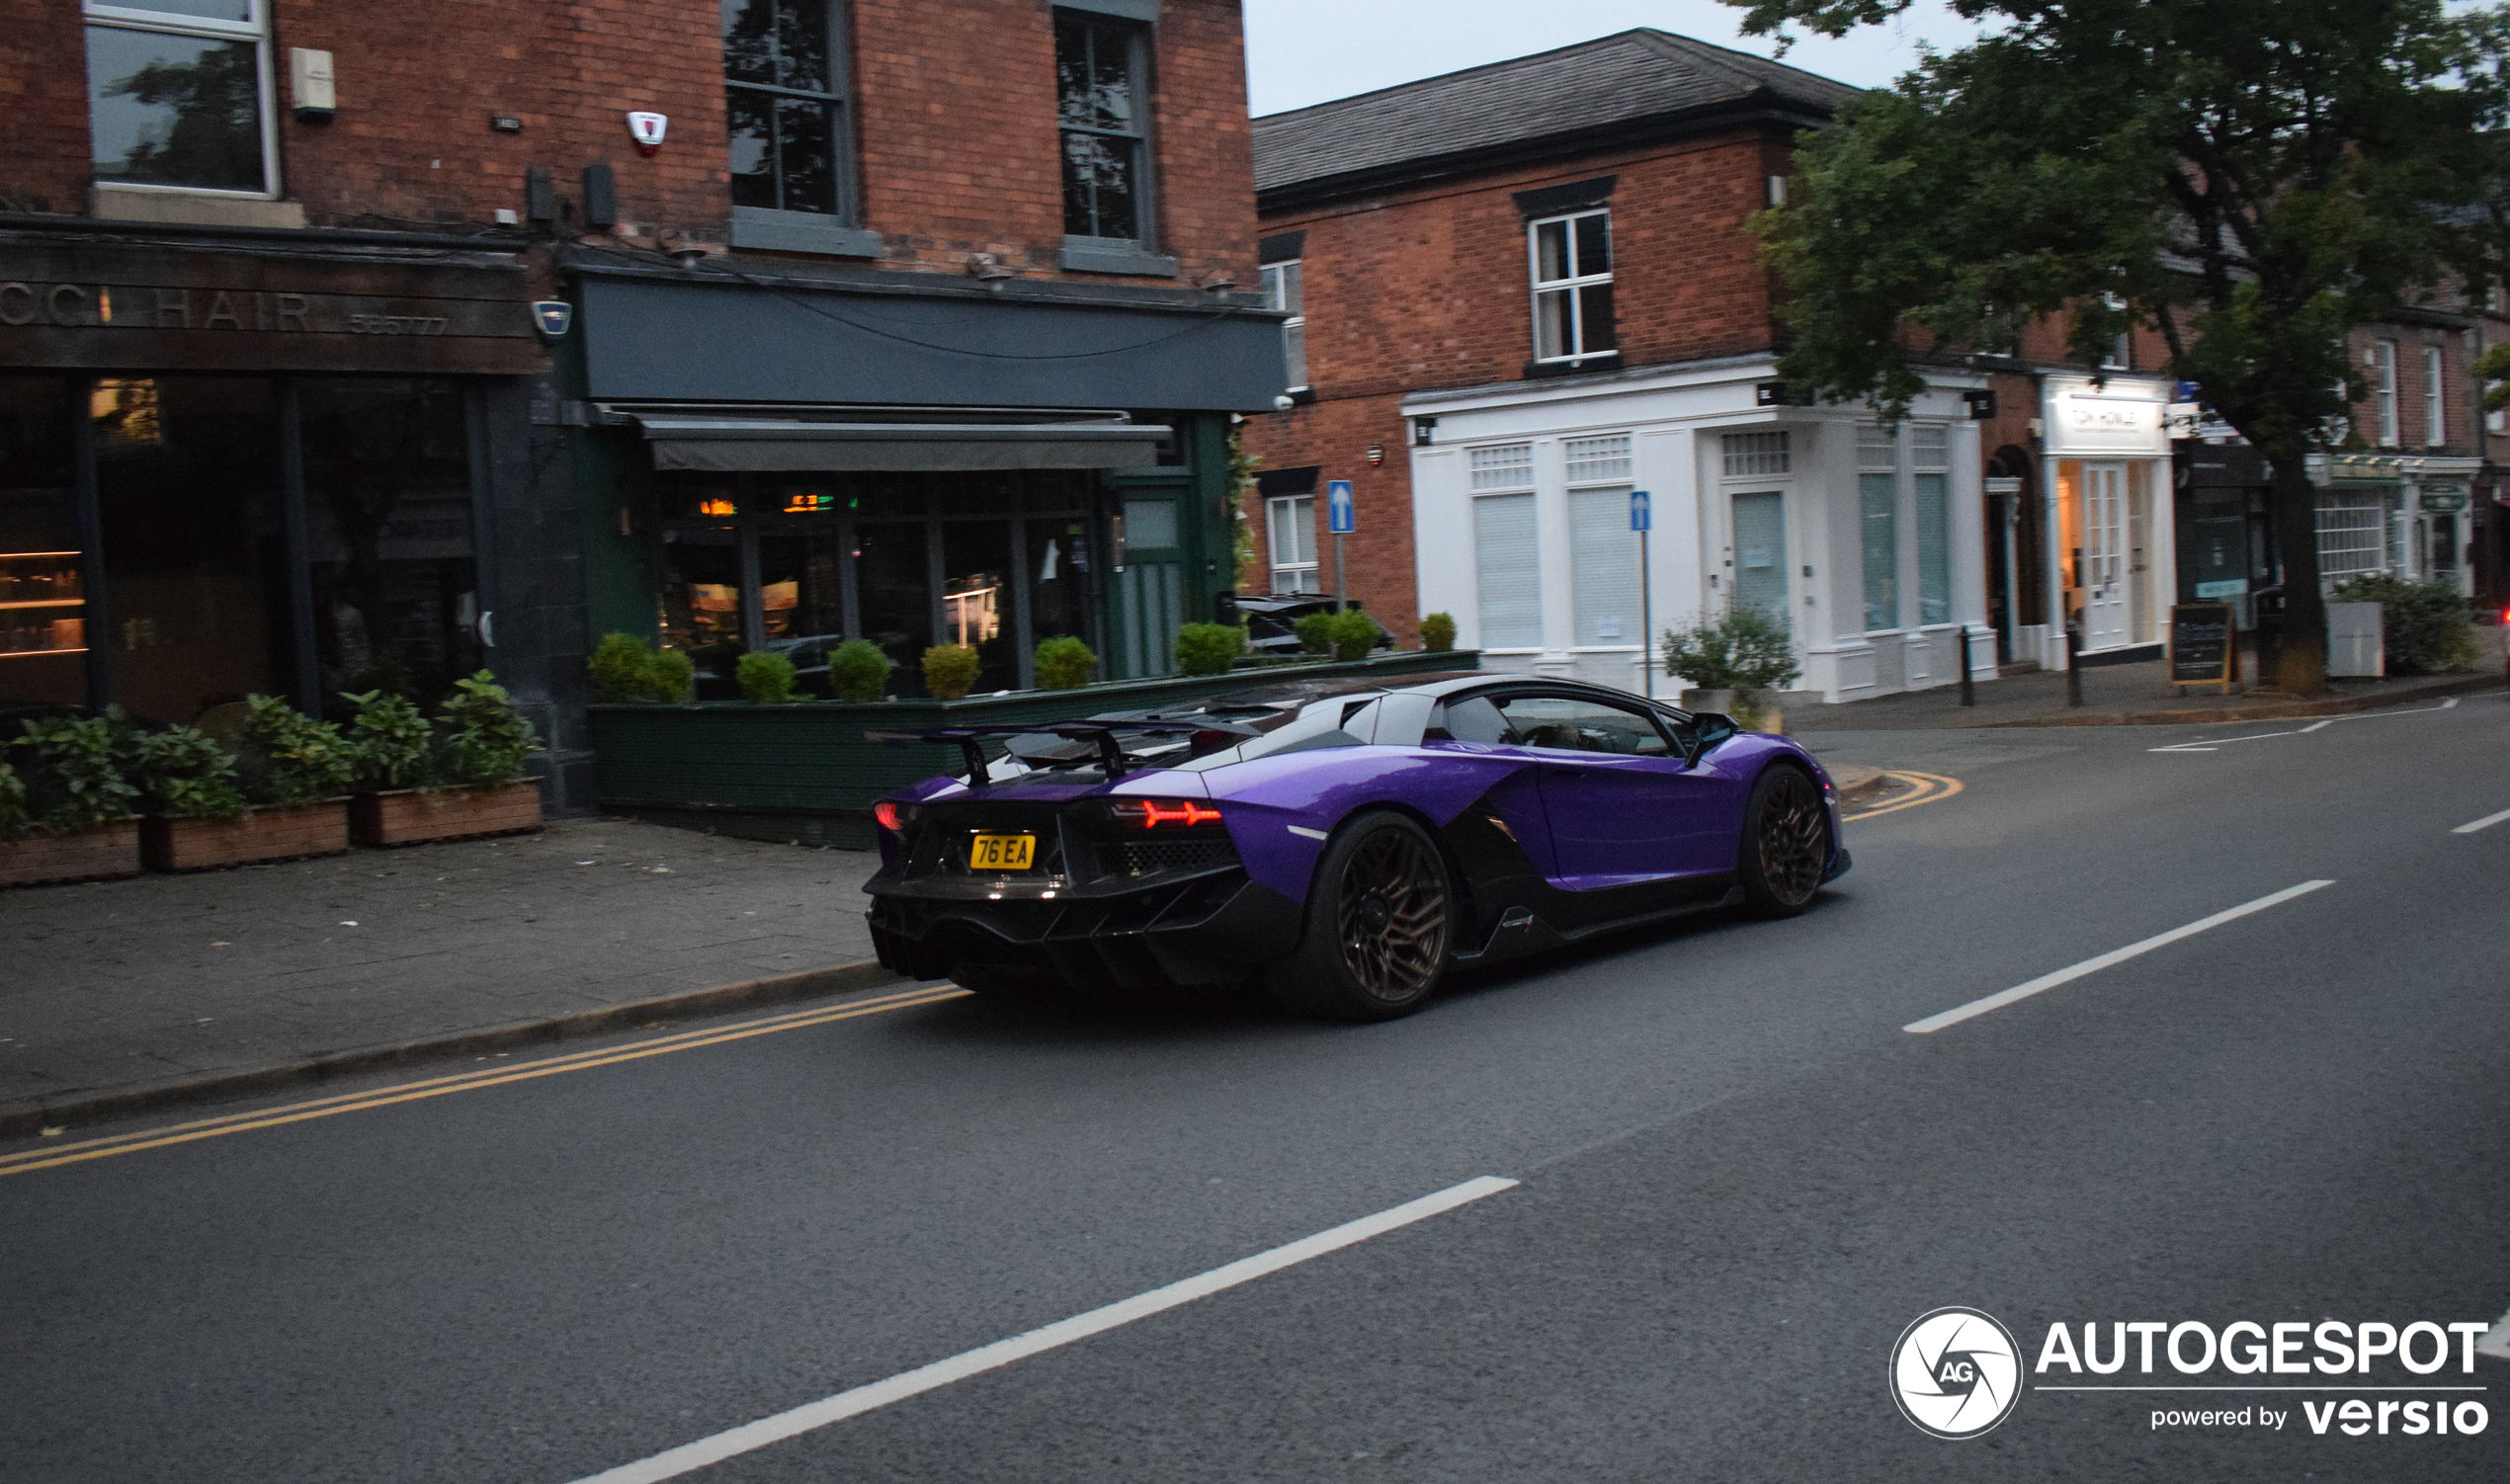 Another Aventador S by Onyx Design shows up in London